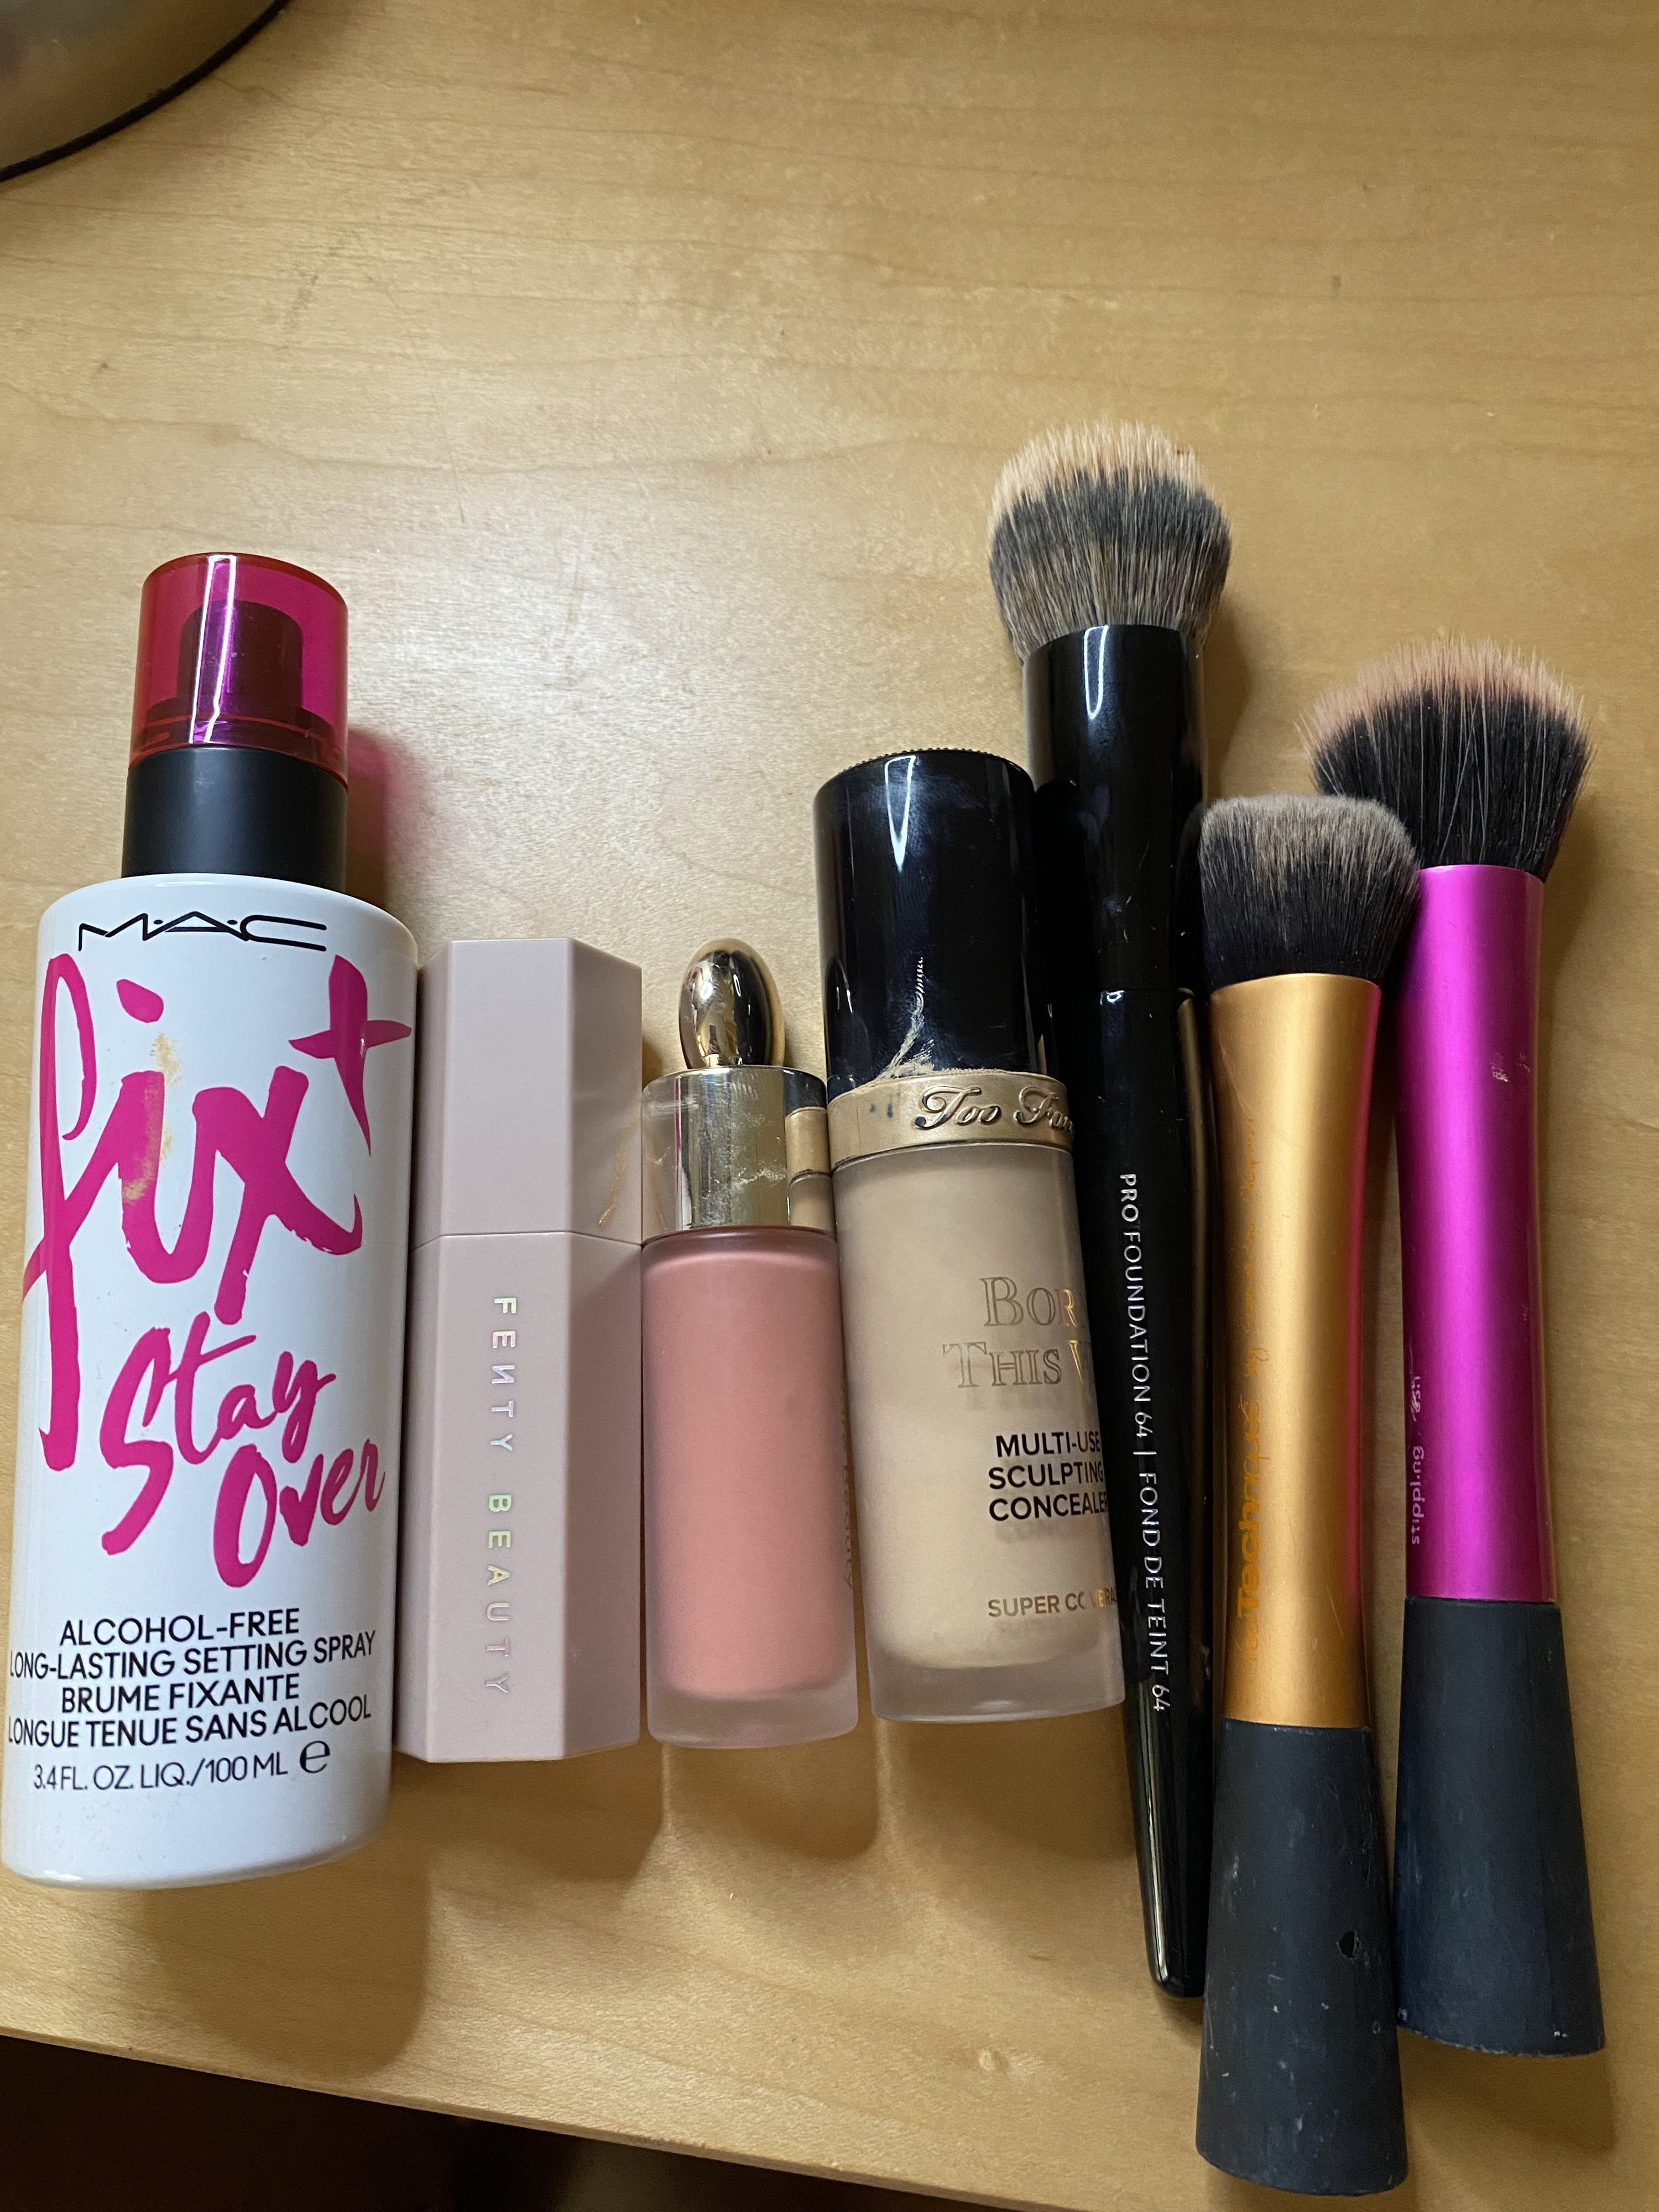 A row of makeup products on a table